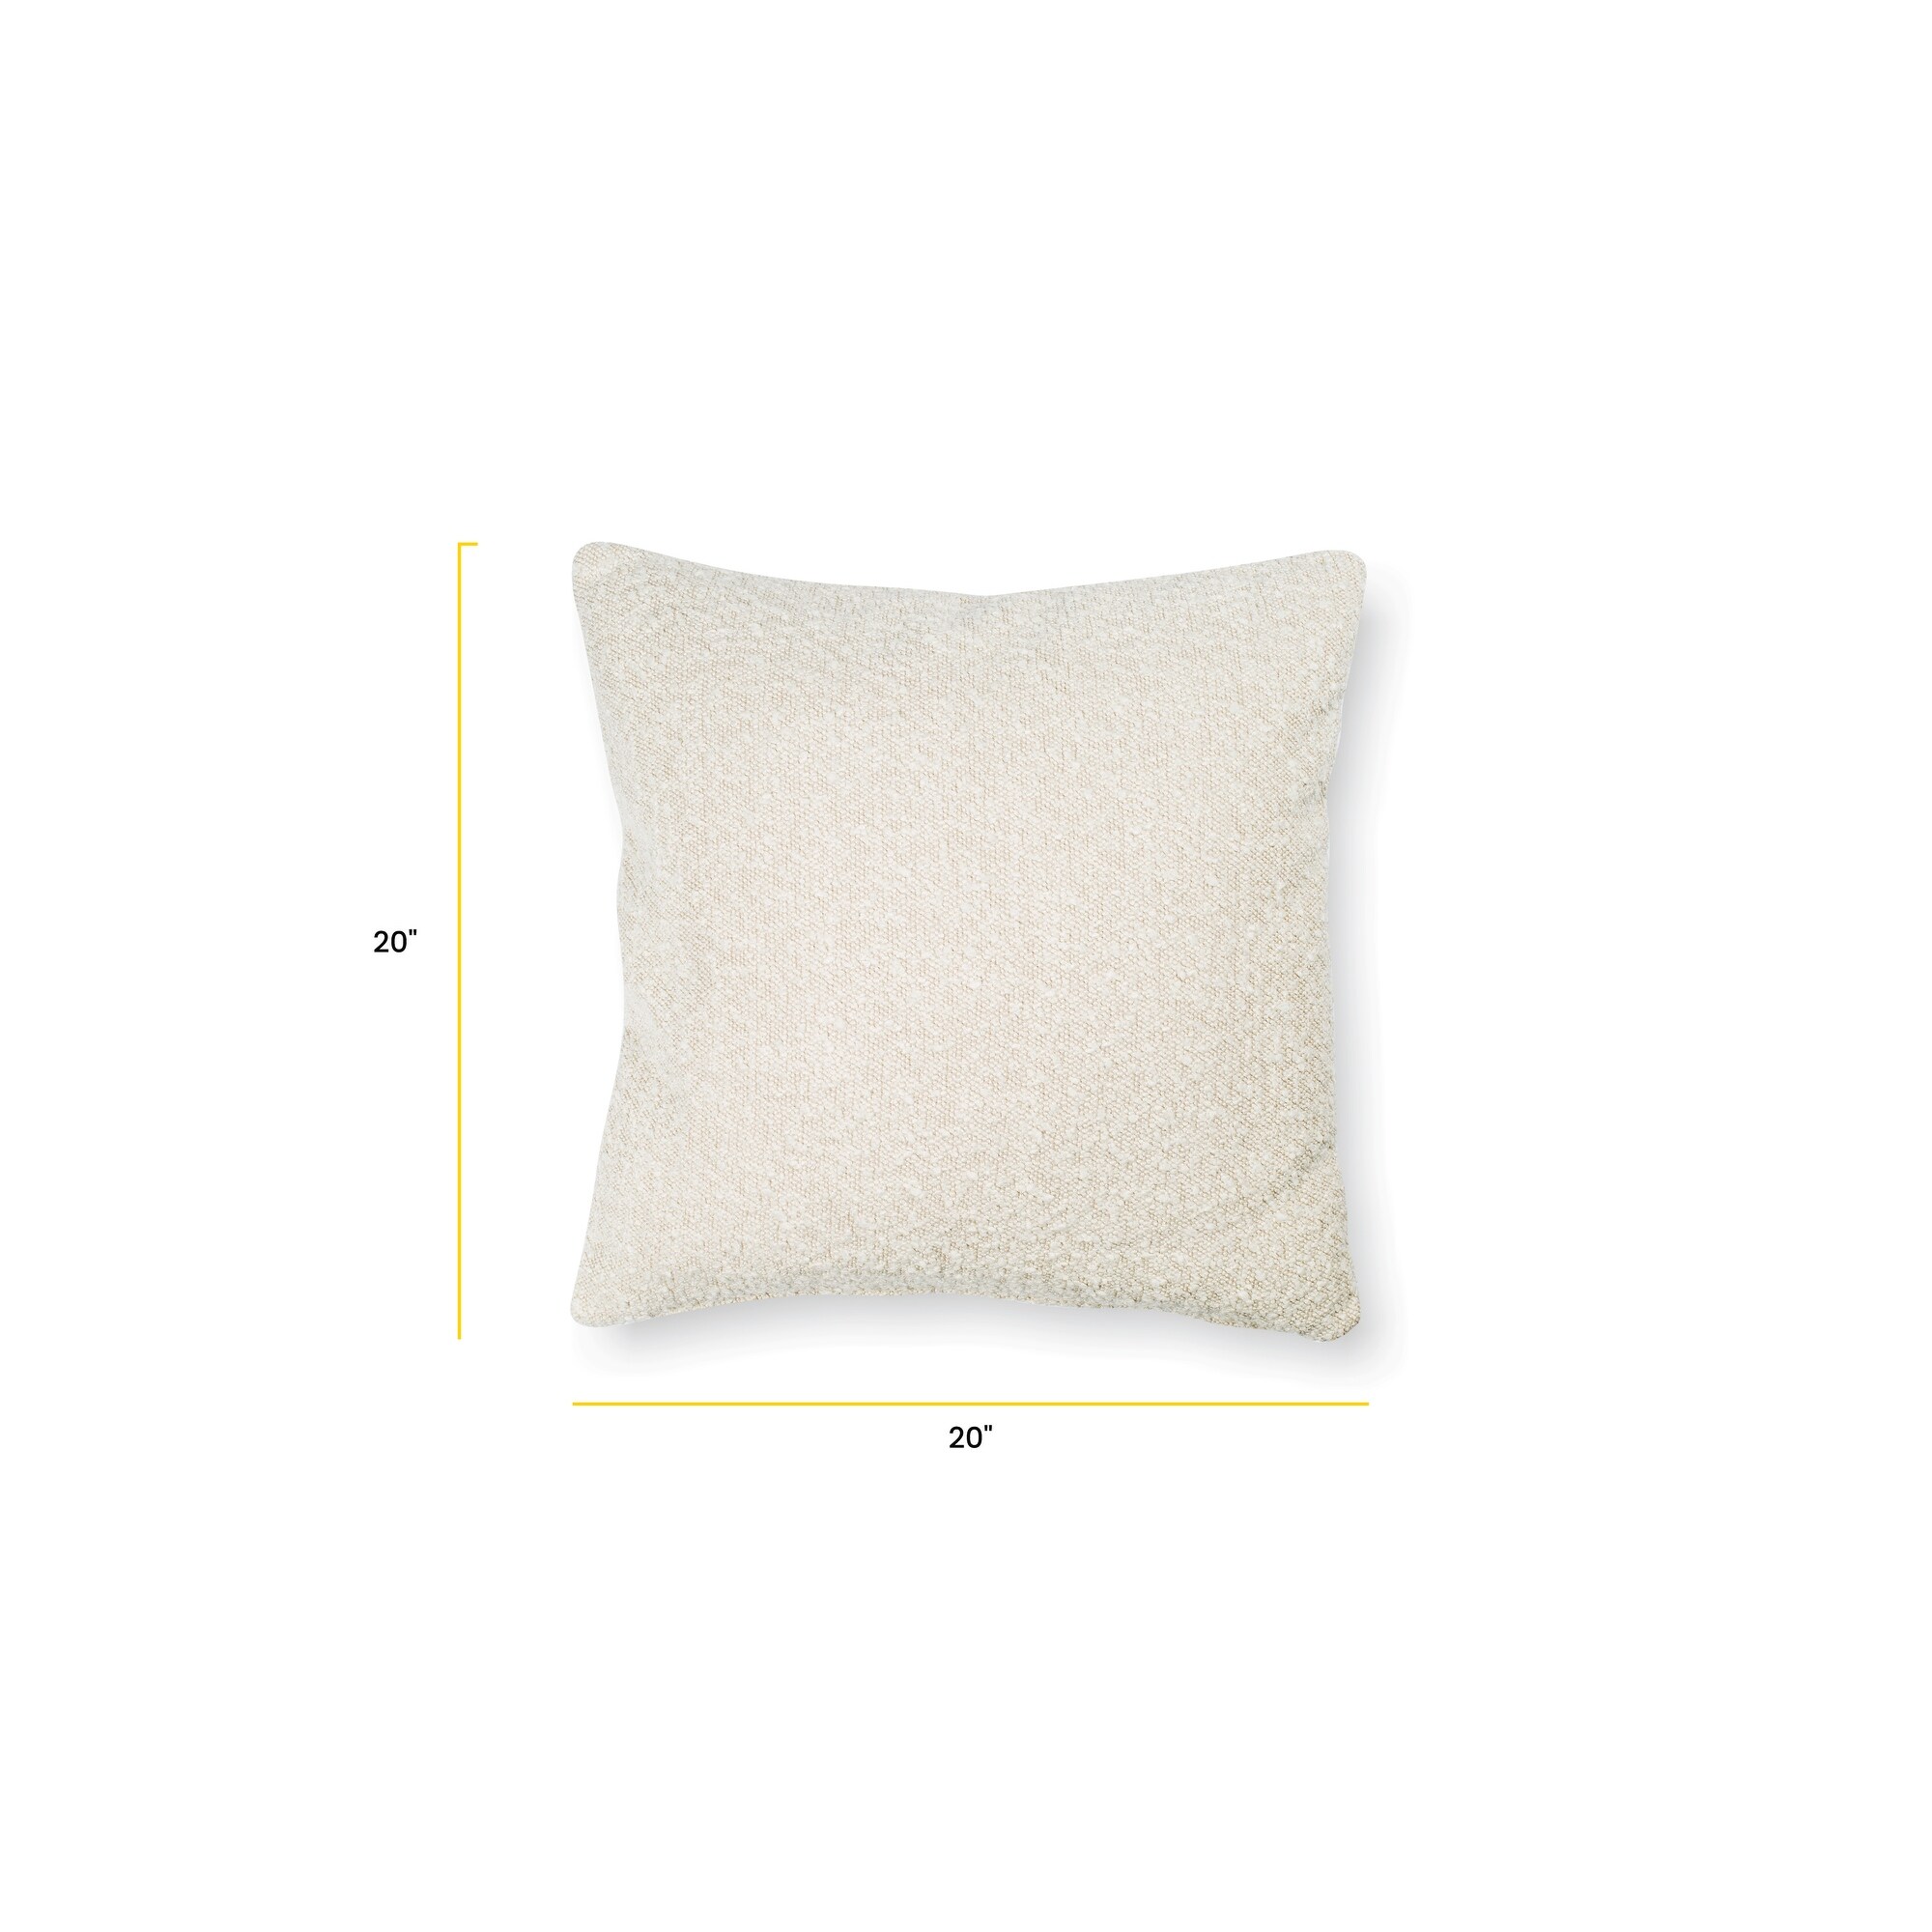 Poly and Bark Fia Boucle Pillow in Crema White Boucle (Set of 2)